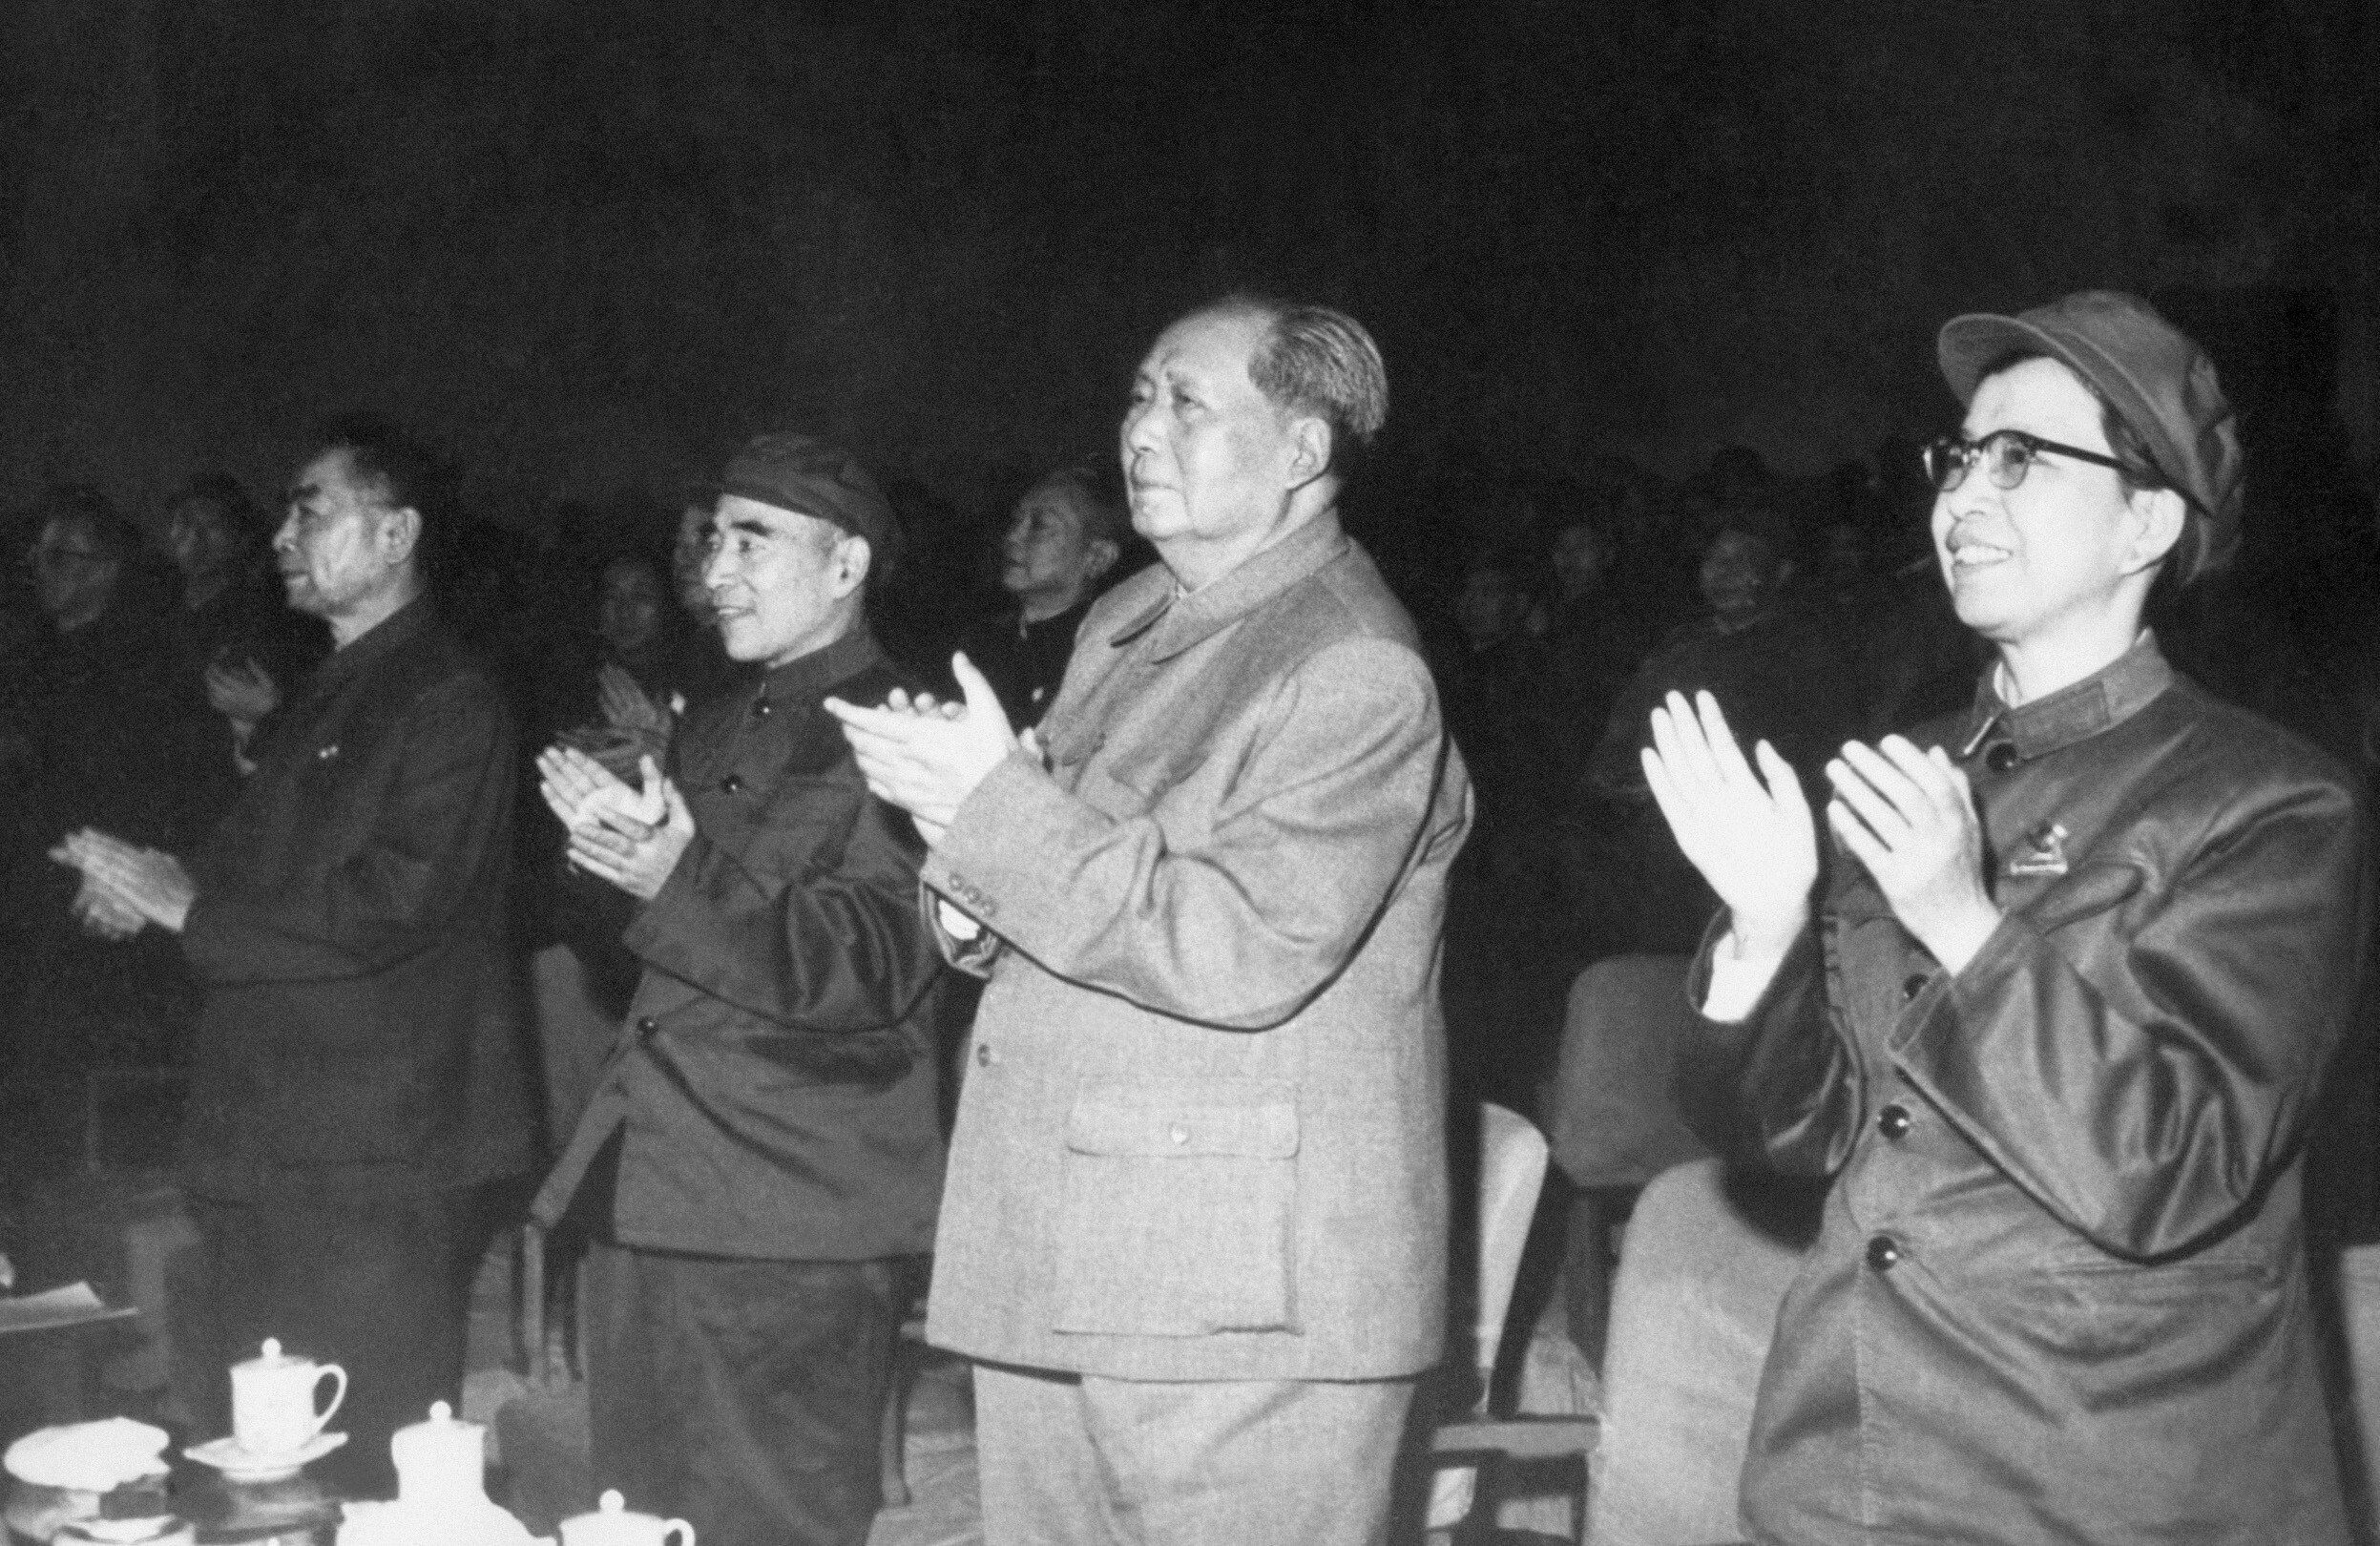 Communist Party chairman and Chinese president Mao Zedong (second right) joins (from left) premier Zhou Enlai, defence minister Lin Biao and ‘Madame Mao’ Jiang Qing in a standing ovation during a meeting in Beijing in April 1967. Mao’s Cultural Revolution was launched the previous year. Photo: Xinhua/AFP